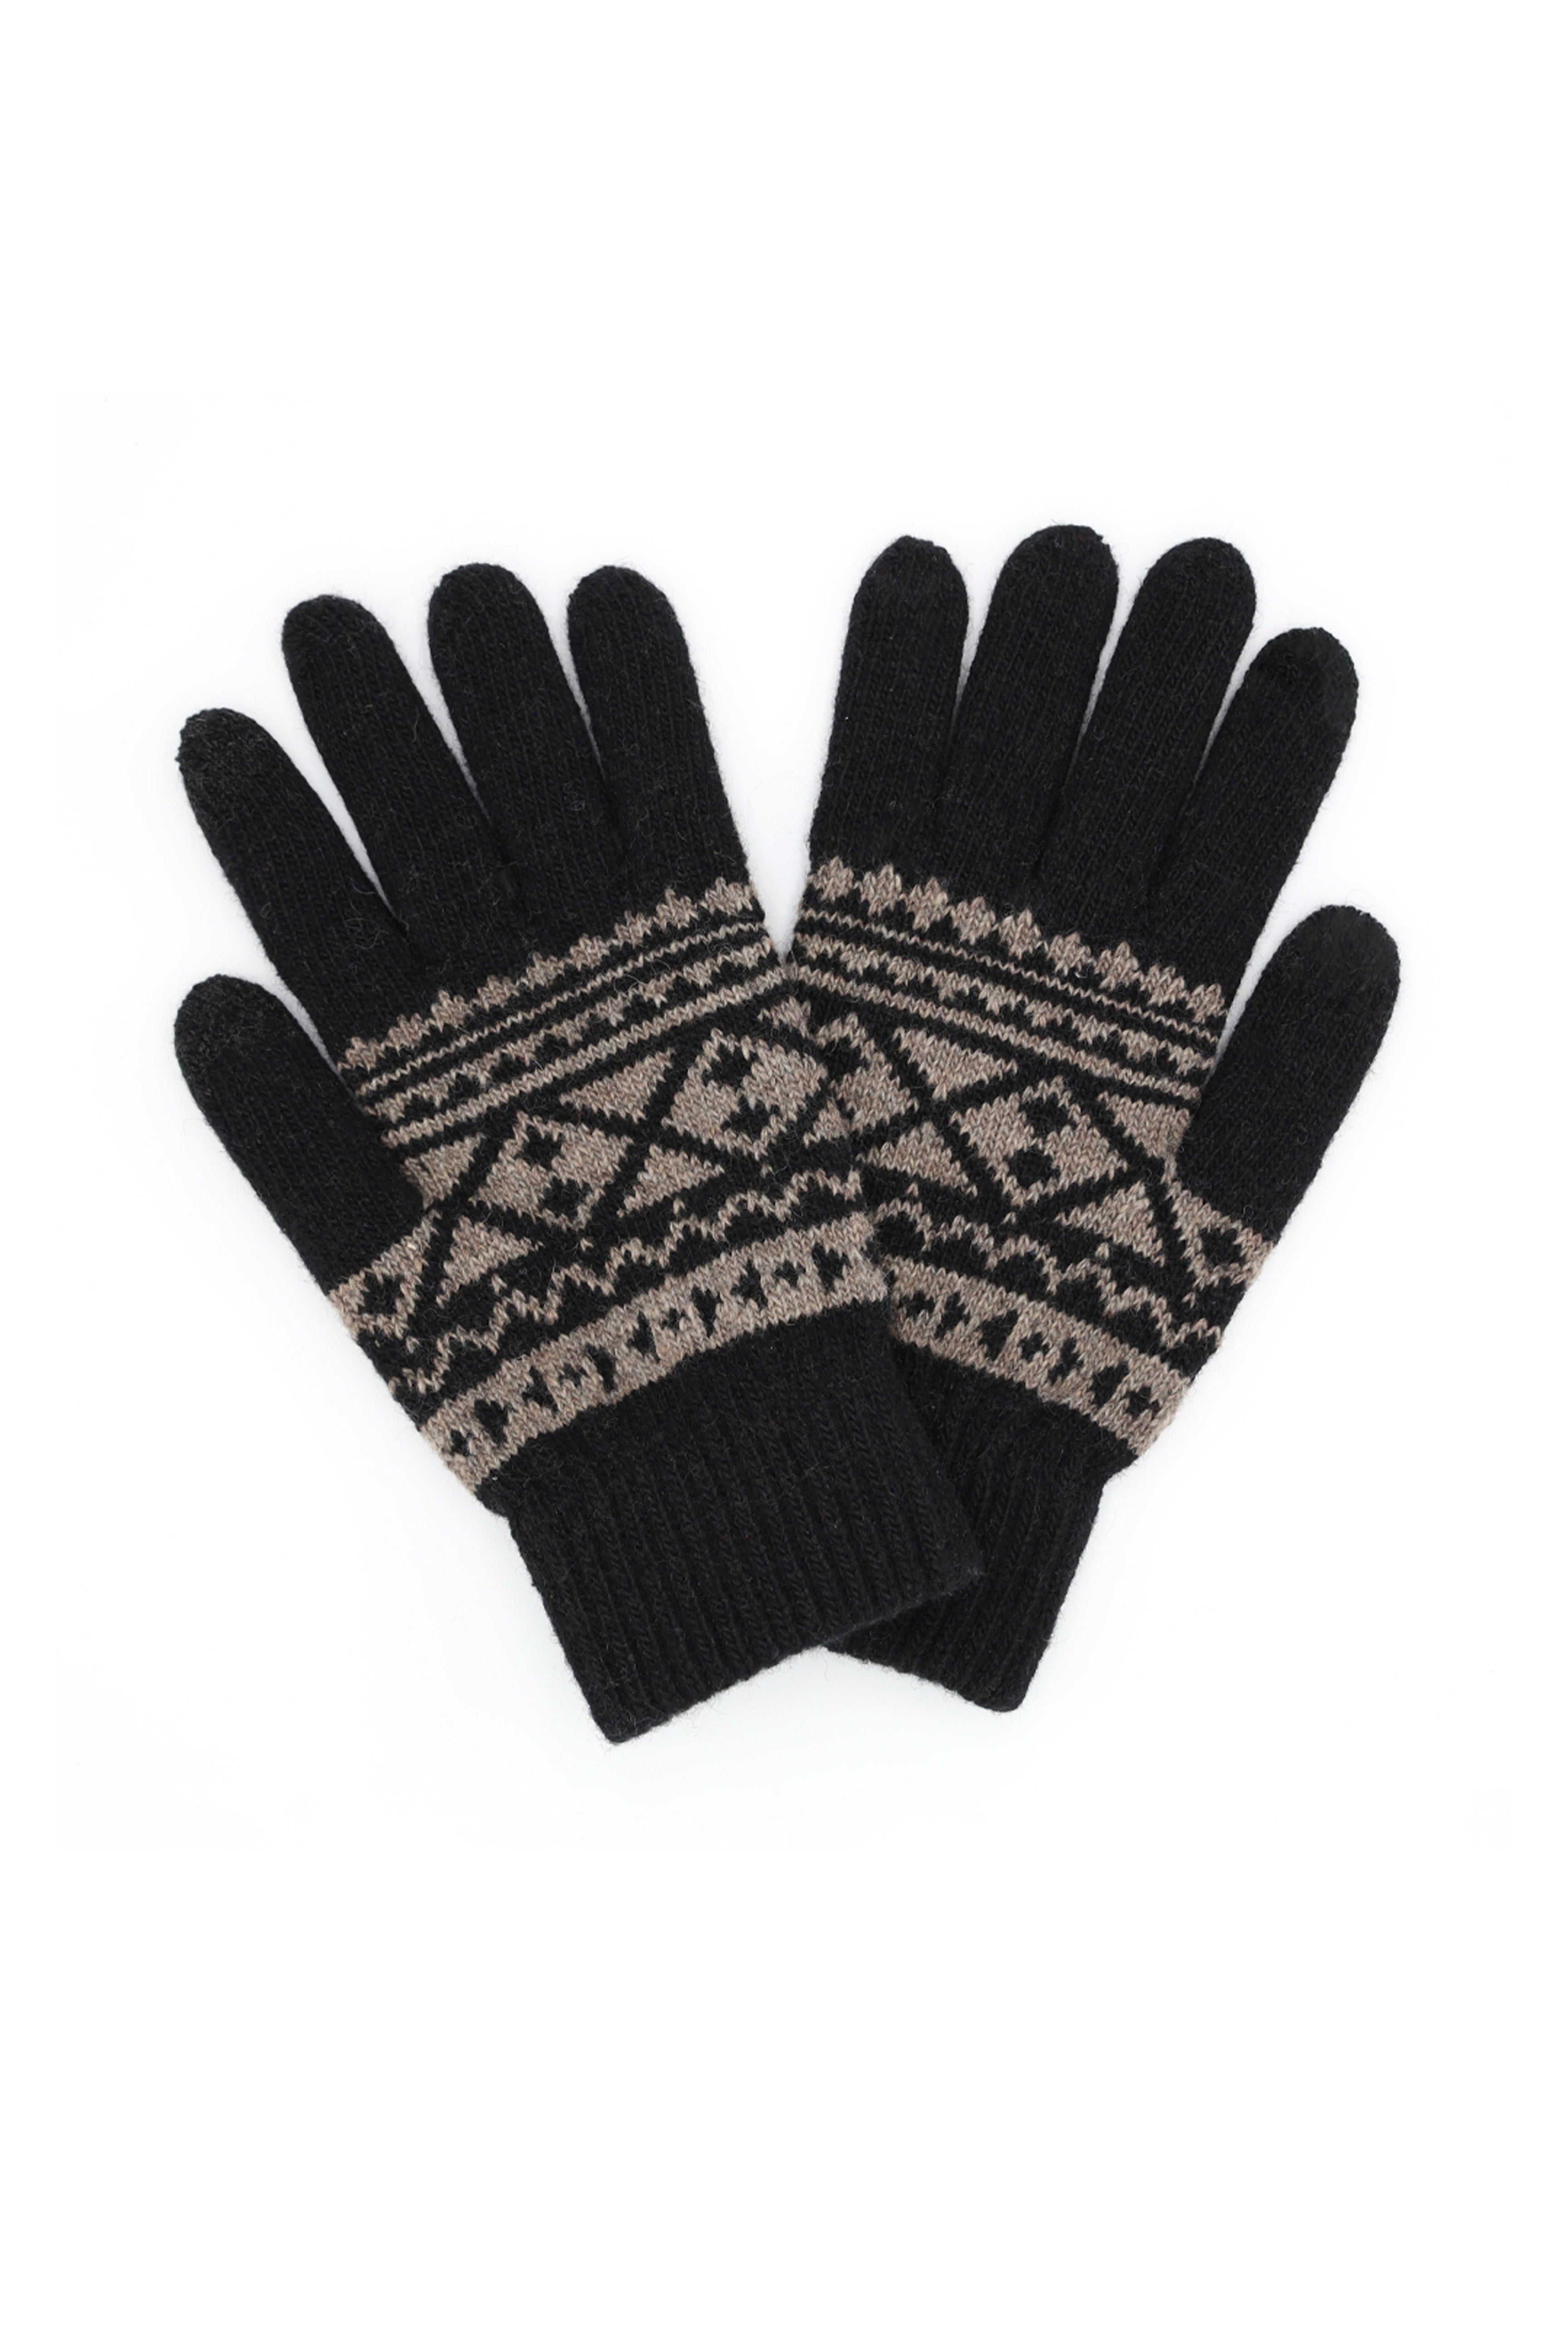 5309 - Aztec Stretch Smart Touch Gloves (Various Colors)